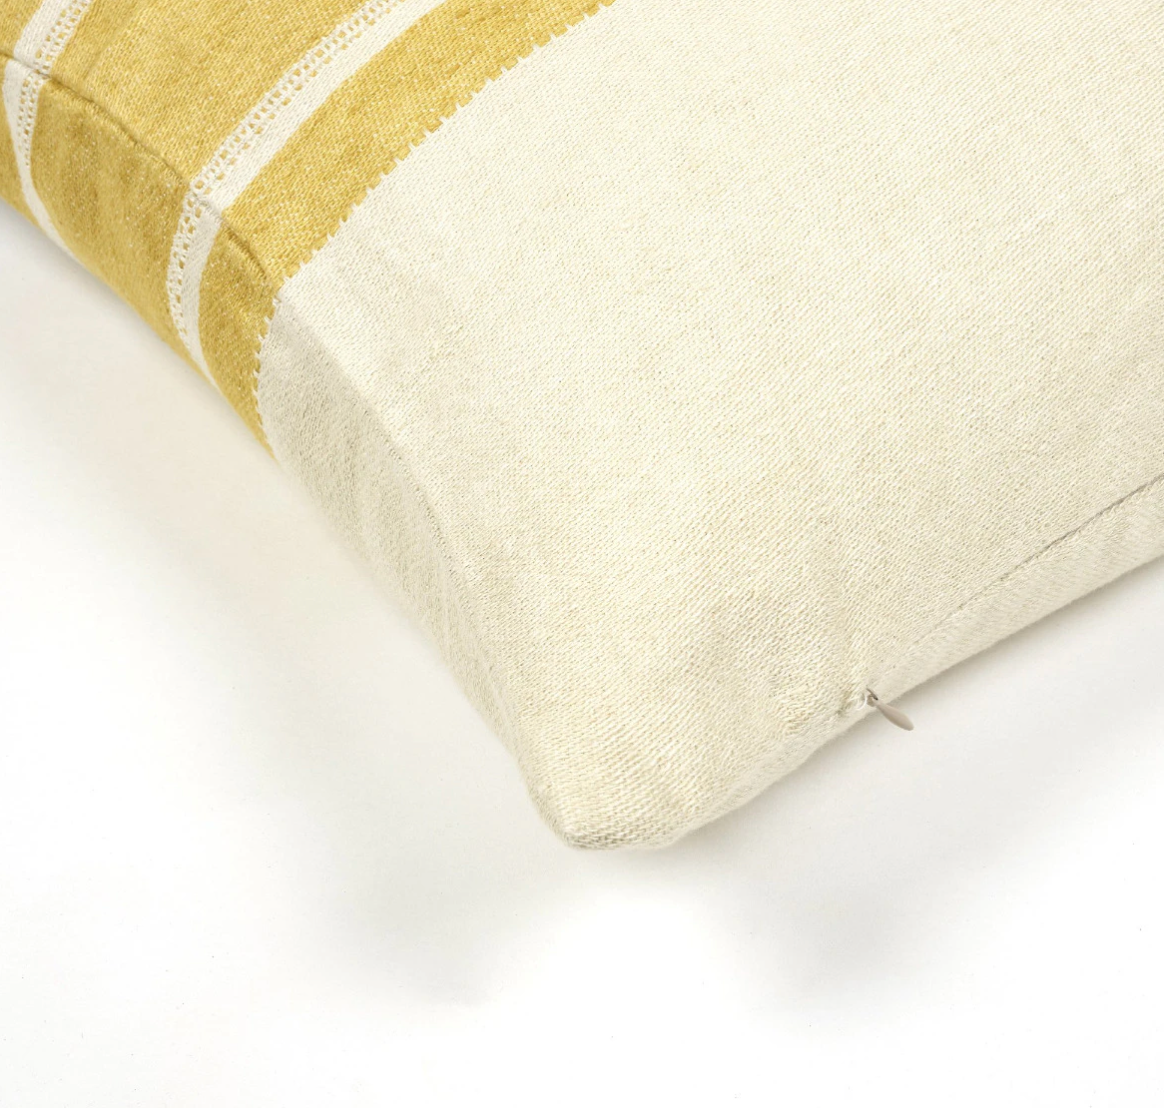 Mustard pillow cover by Libeco